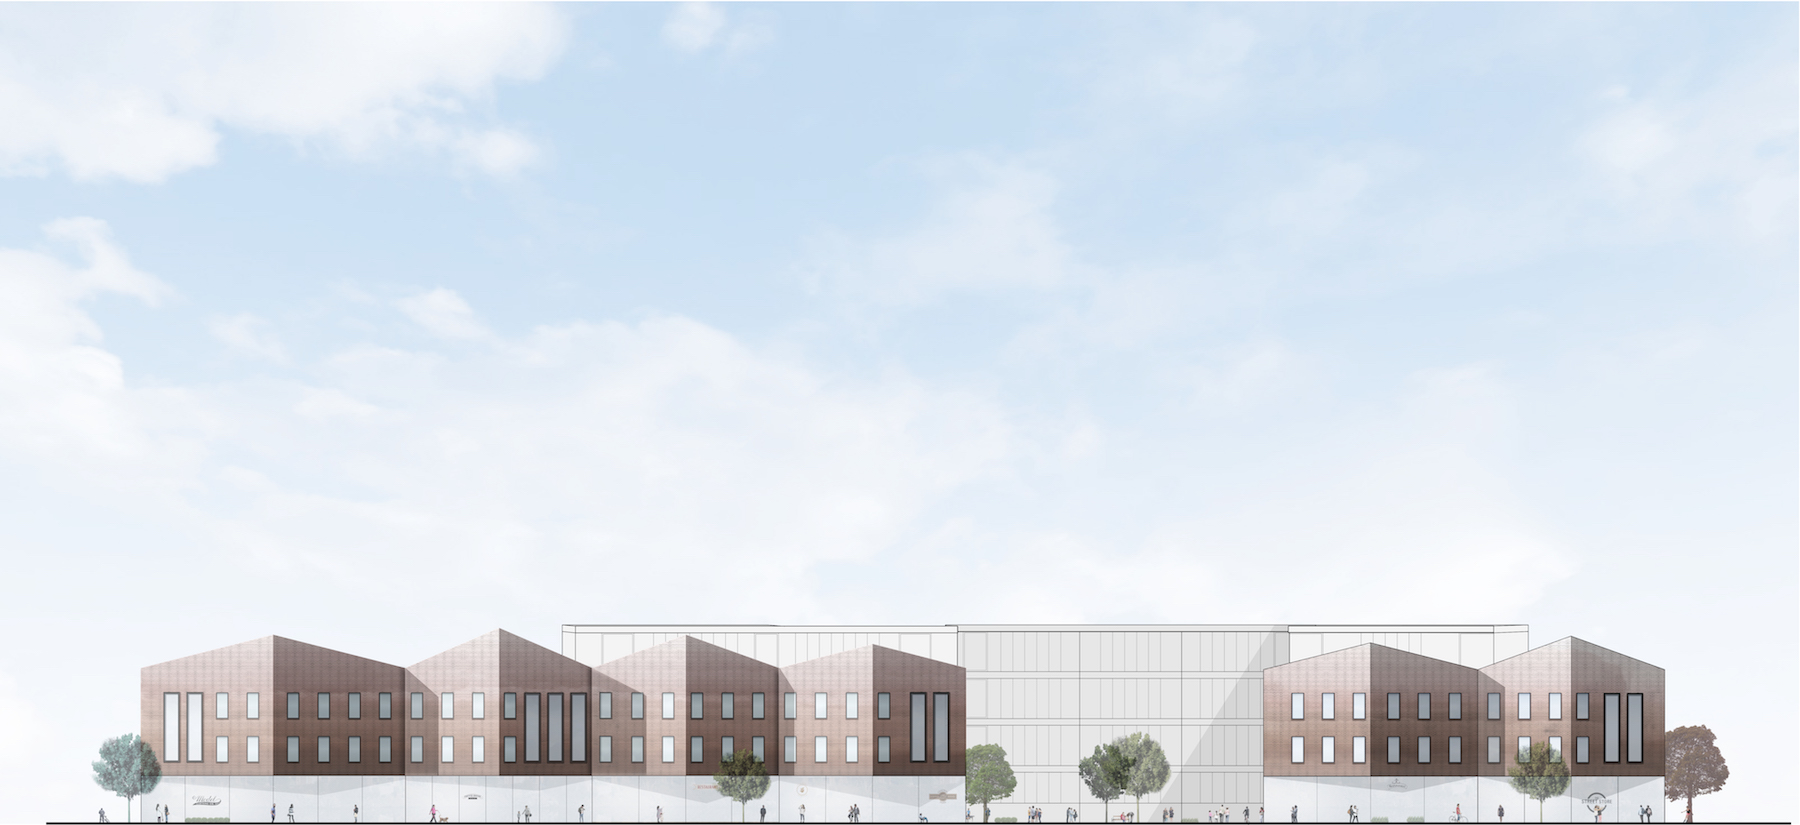 Elevation drawing of a proposed student housing scheme copy